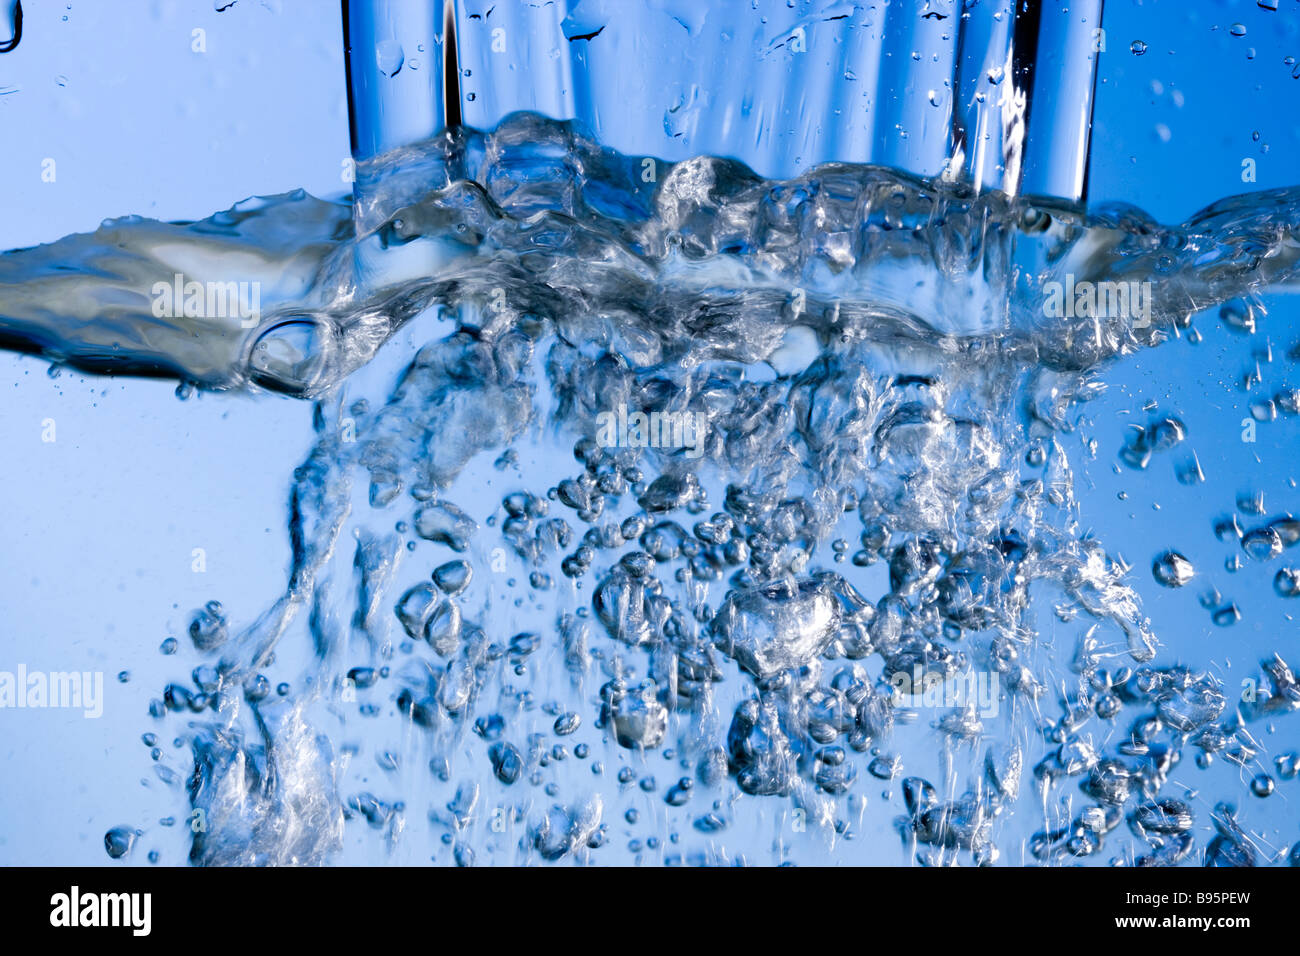 Pouring water creating bubbles Stock Photo